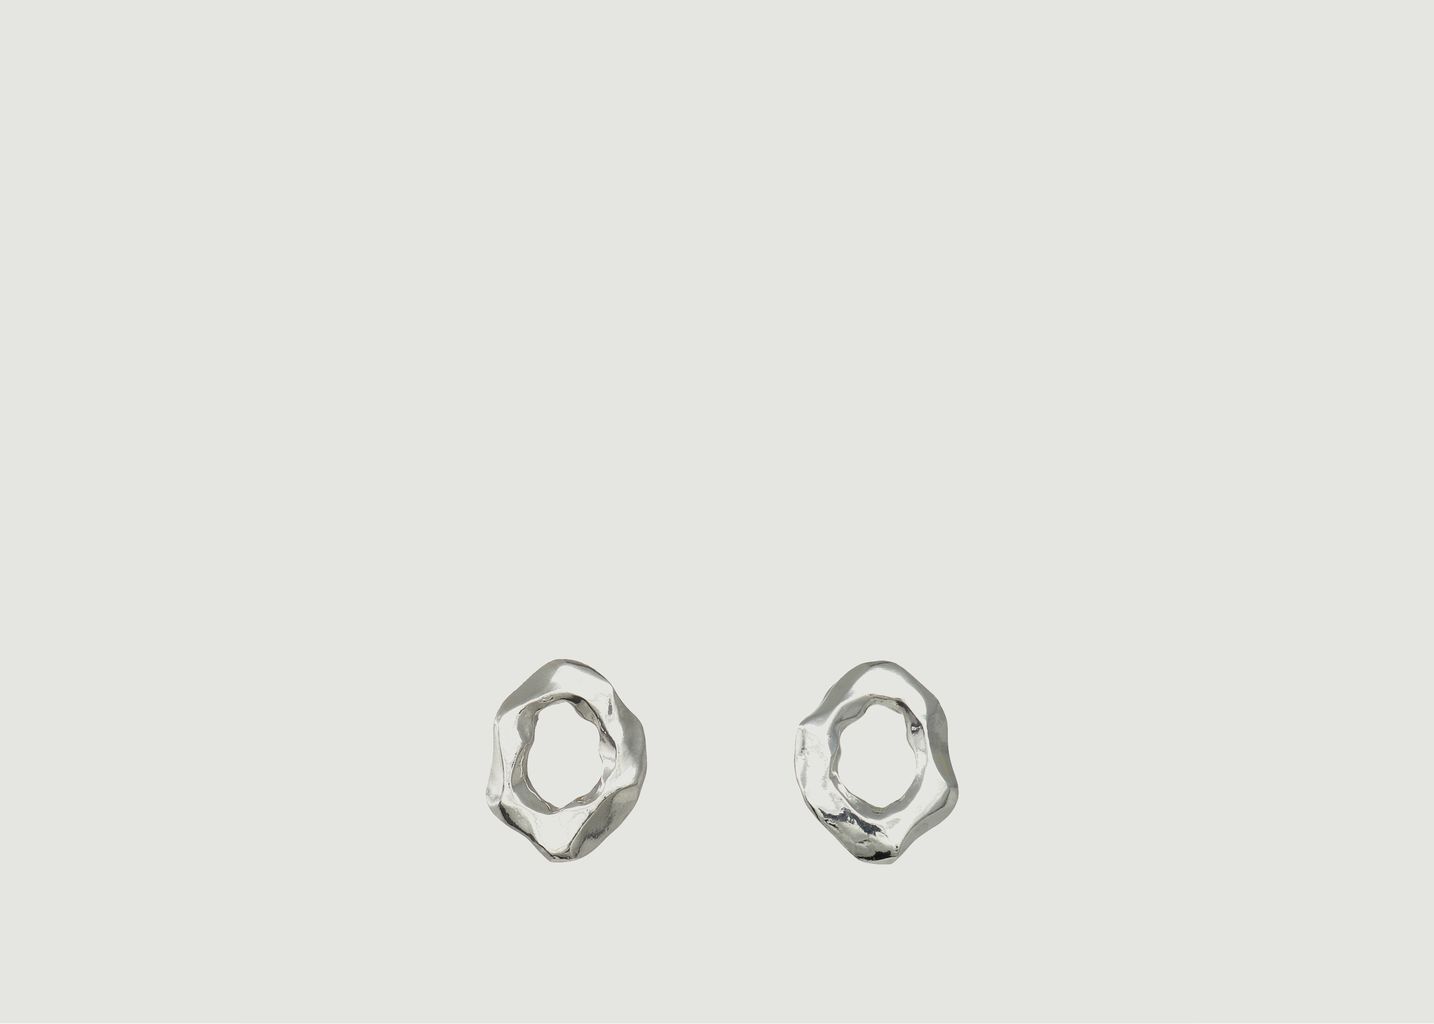 CLED Earrings Canyon Stud